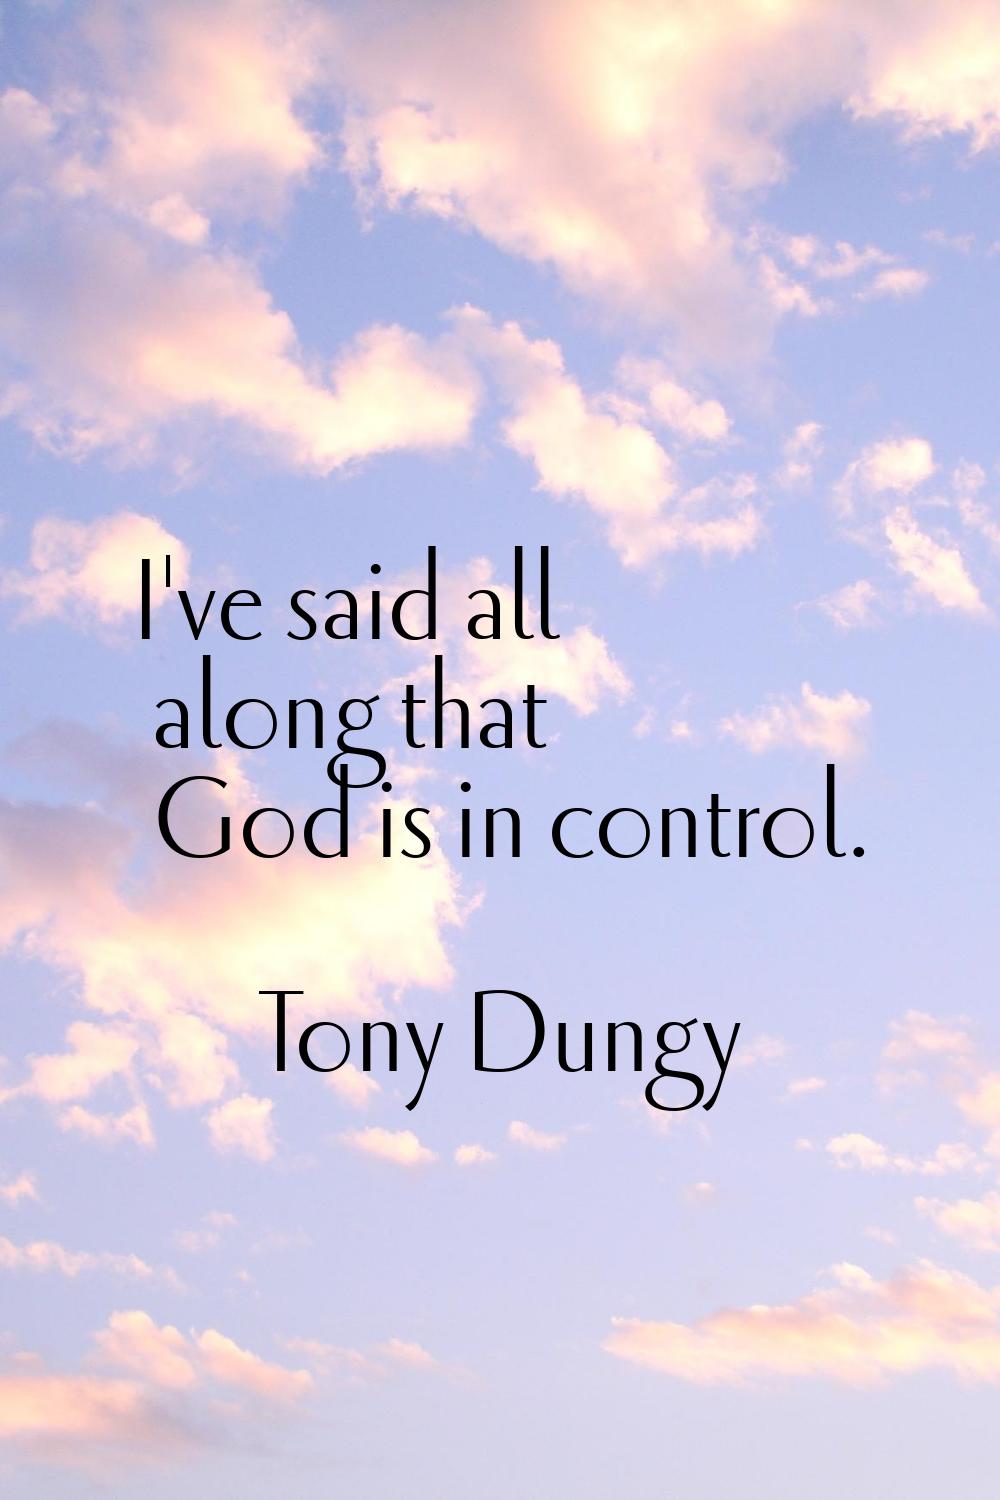 I've said all along that God is in control.